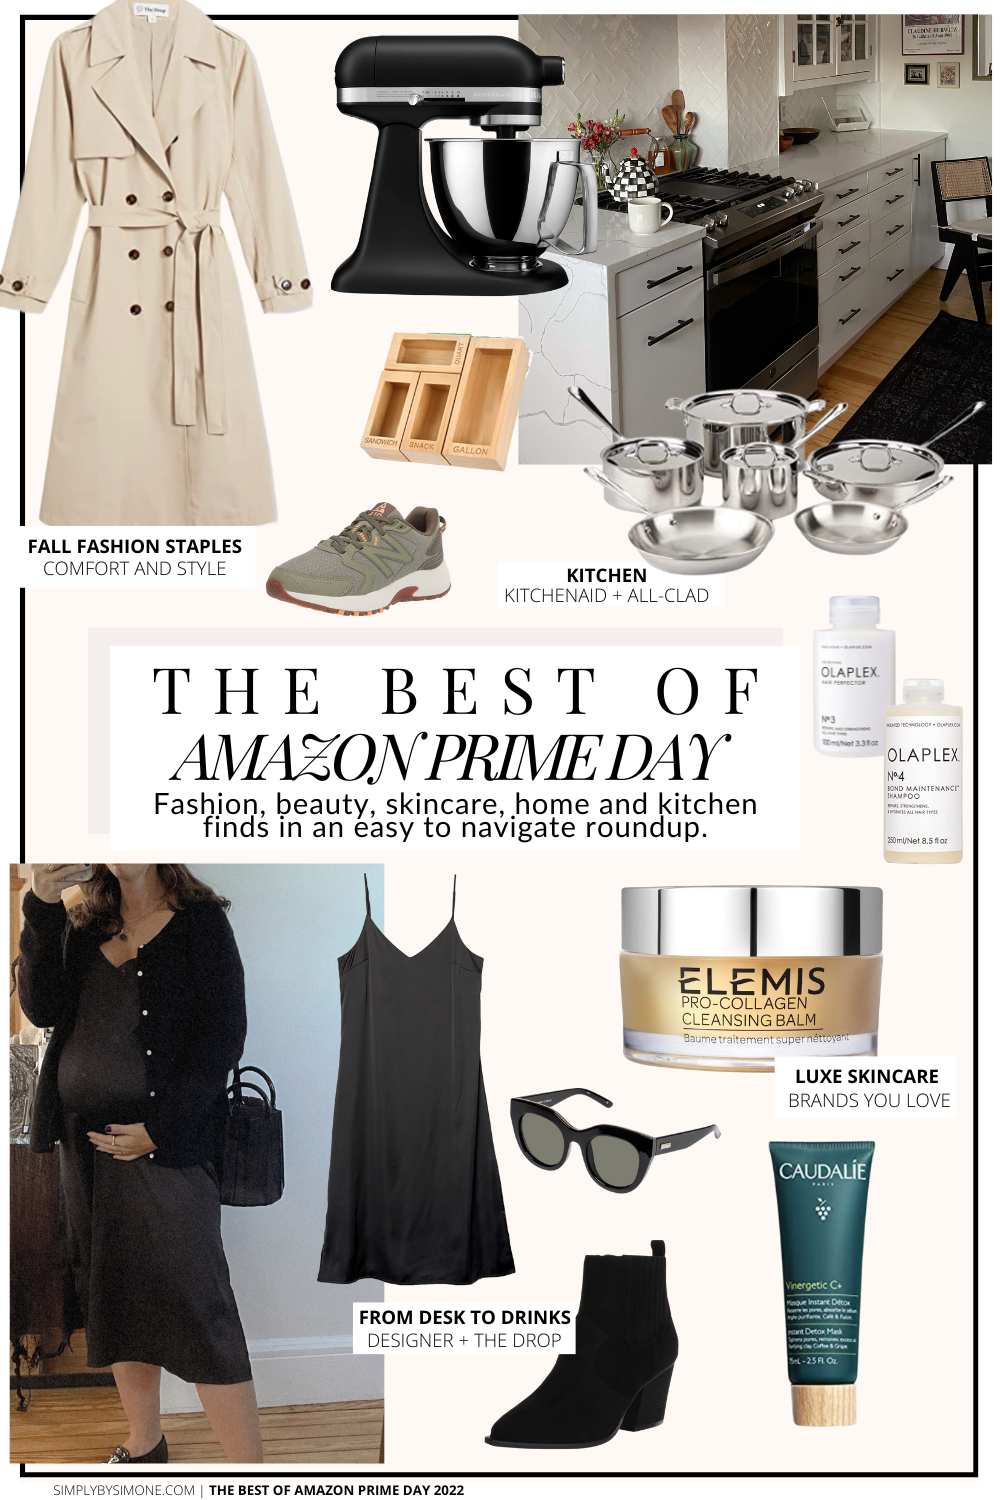 The Best of Amazon Prime Day 2022 | Amazon Home Finds | Amazon Beauty Finds | How To Shop Amazon Prime Day | What To Buy Amazon Prime Day | Best Amazon Prime Day Deals | Amazon Shopping Guide | Amazon Fall Capsule Wardrobe | What To Wear This Fall 2022 | Amazon Fashion Finds | Cover Image | Simply by Simone